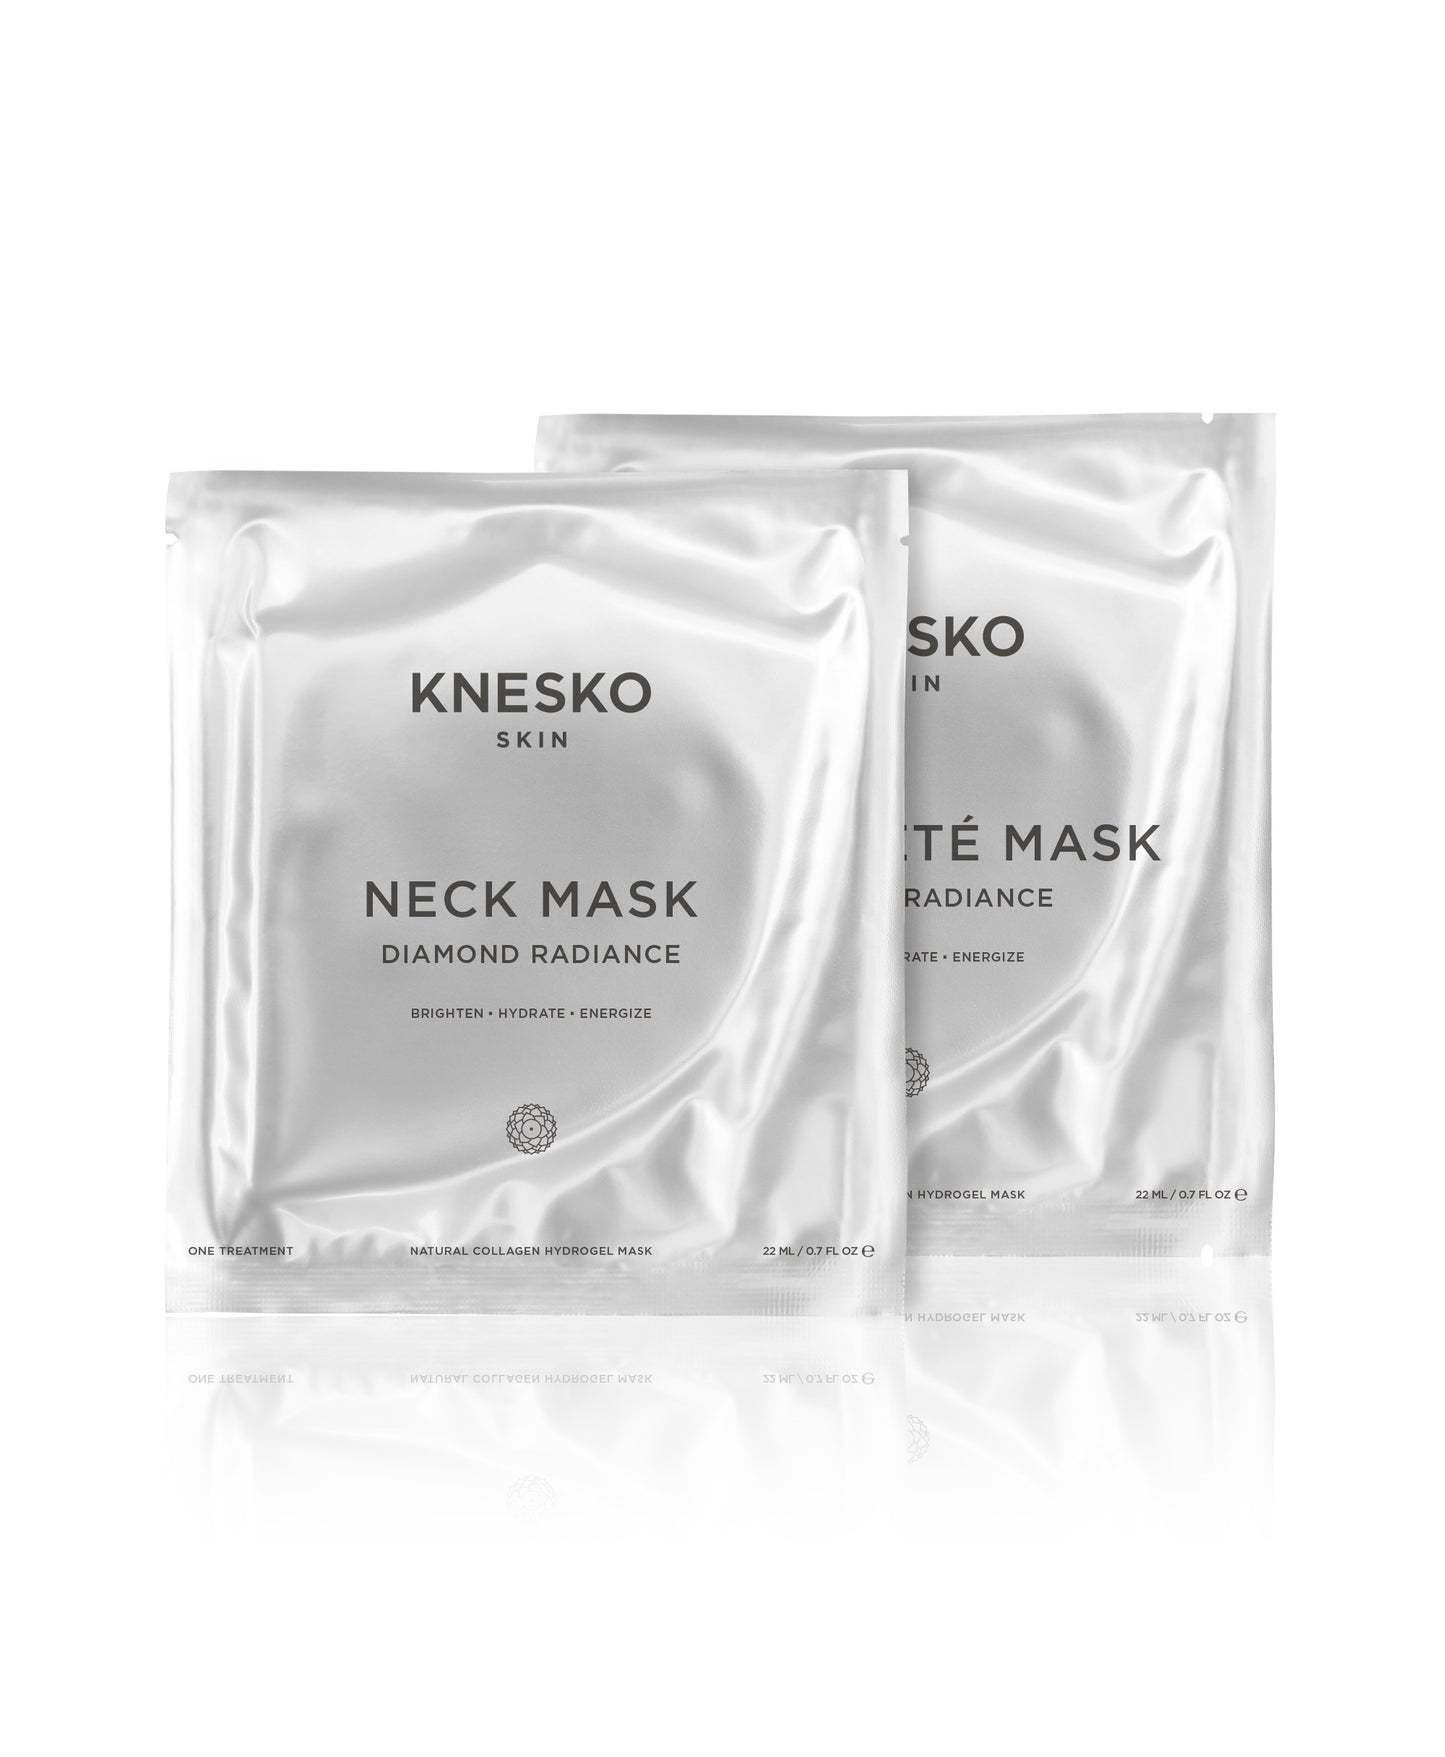 Diamond Radiance Neck and Decollete Mask Combo packaging.